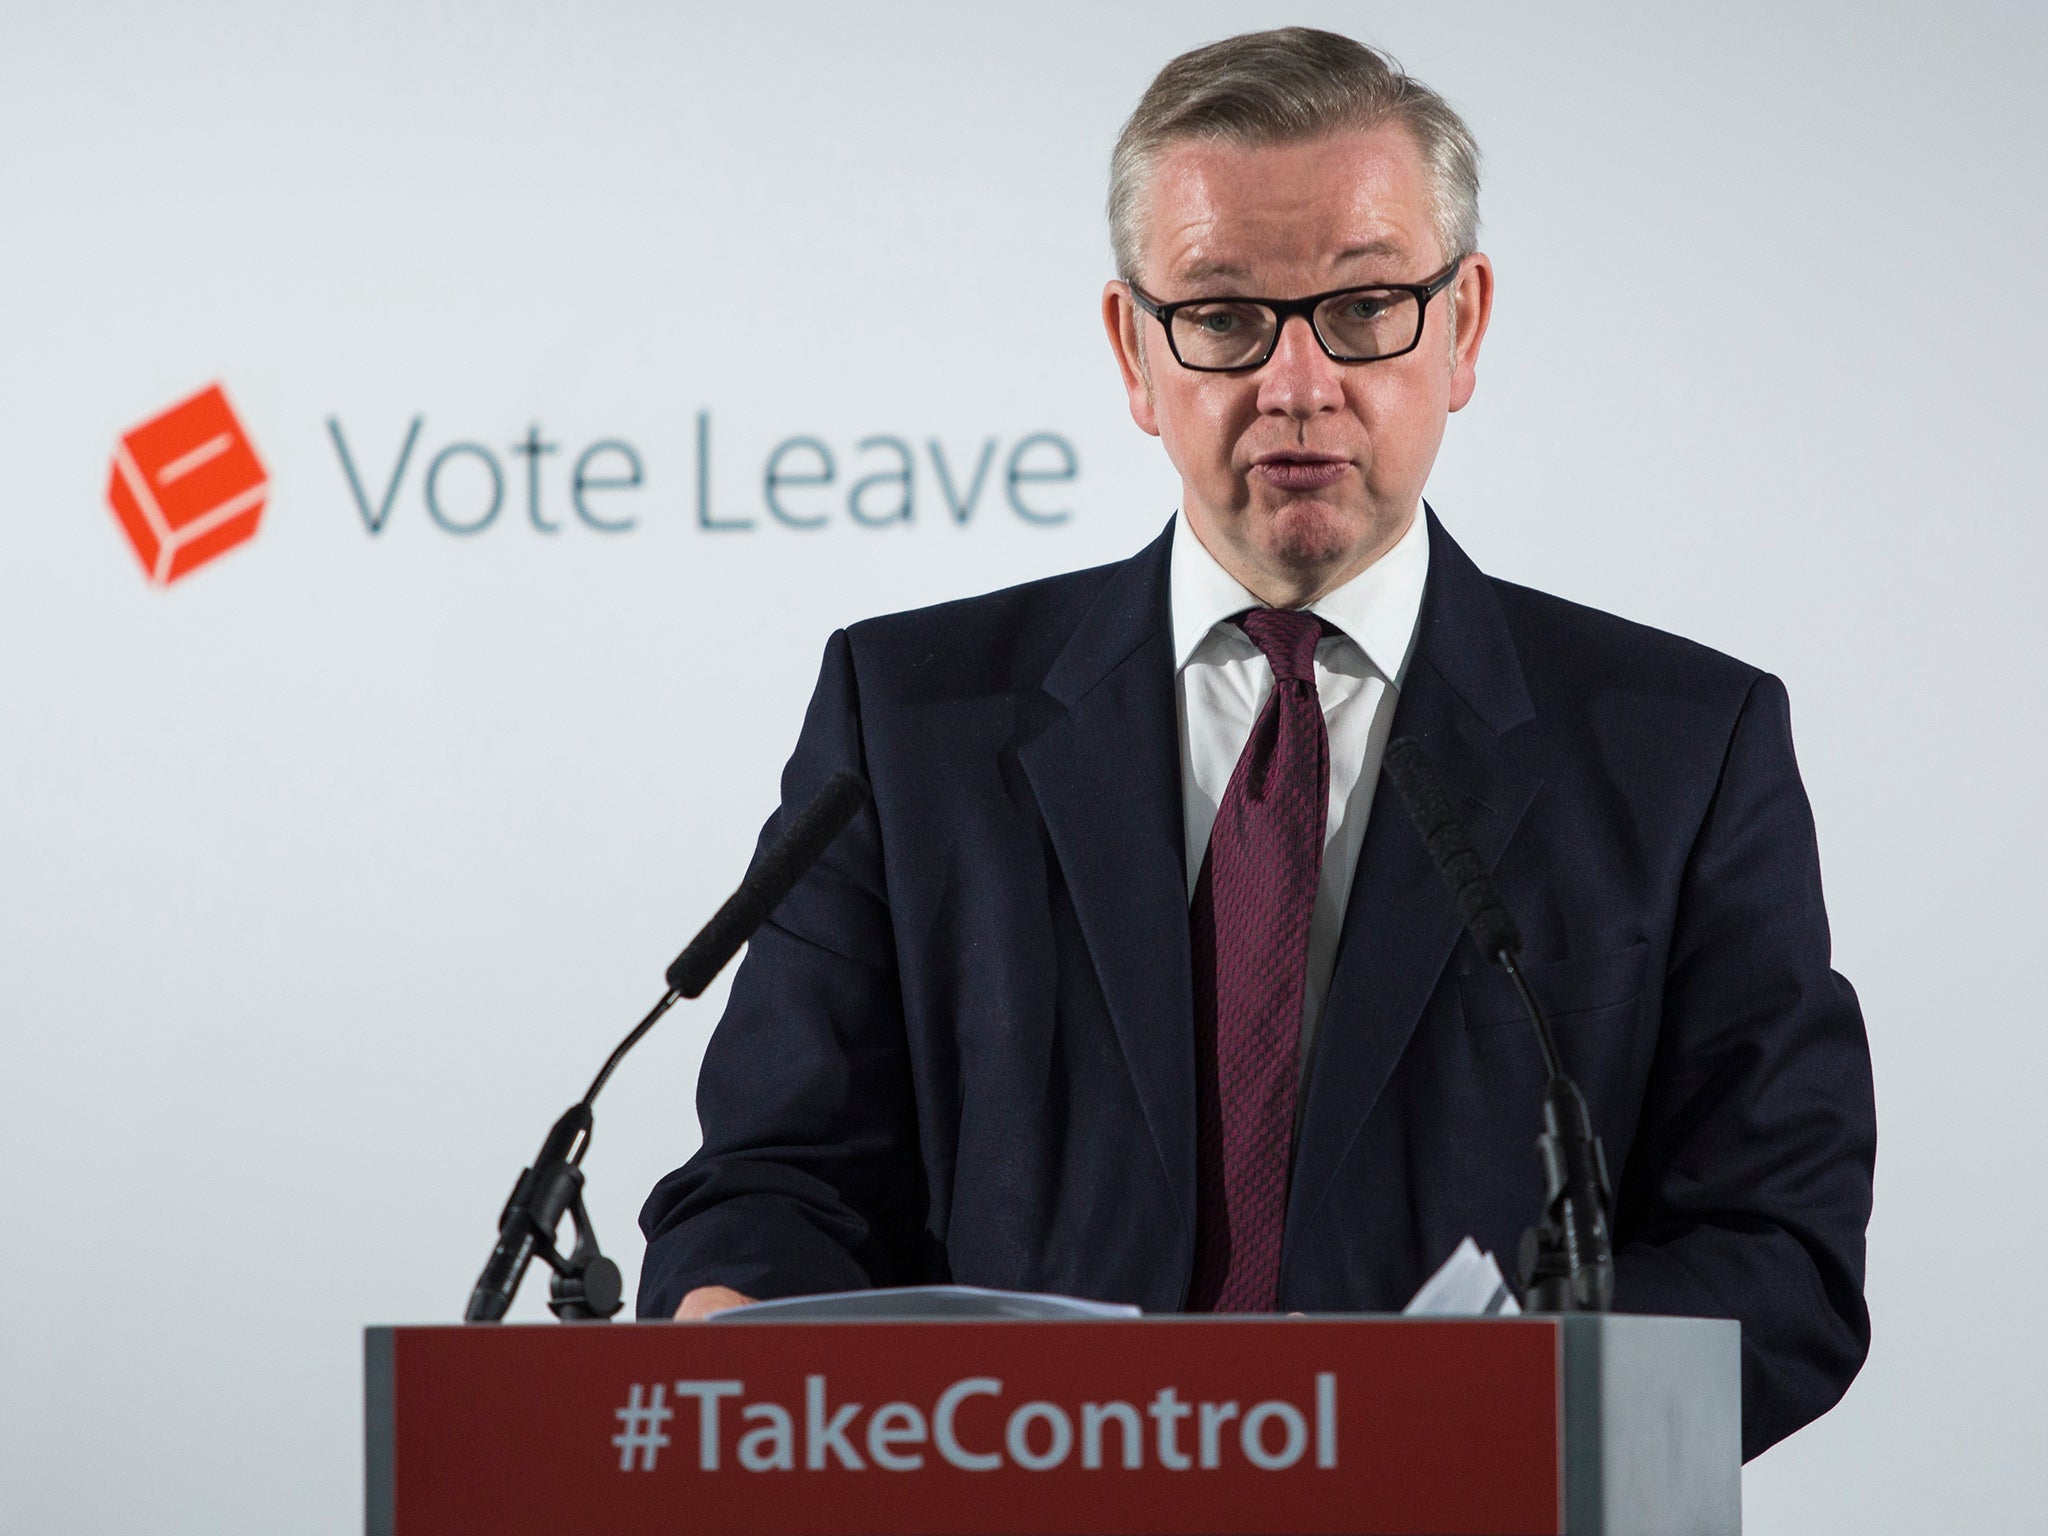 Michael Gove gives a speech at the Vote Leave campaign headquarters in Westminster on June 8